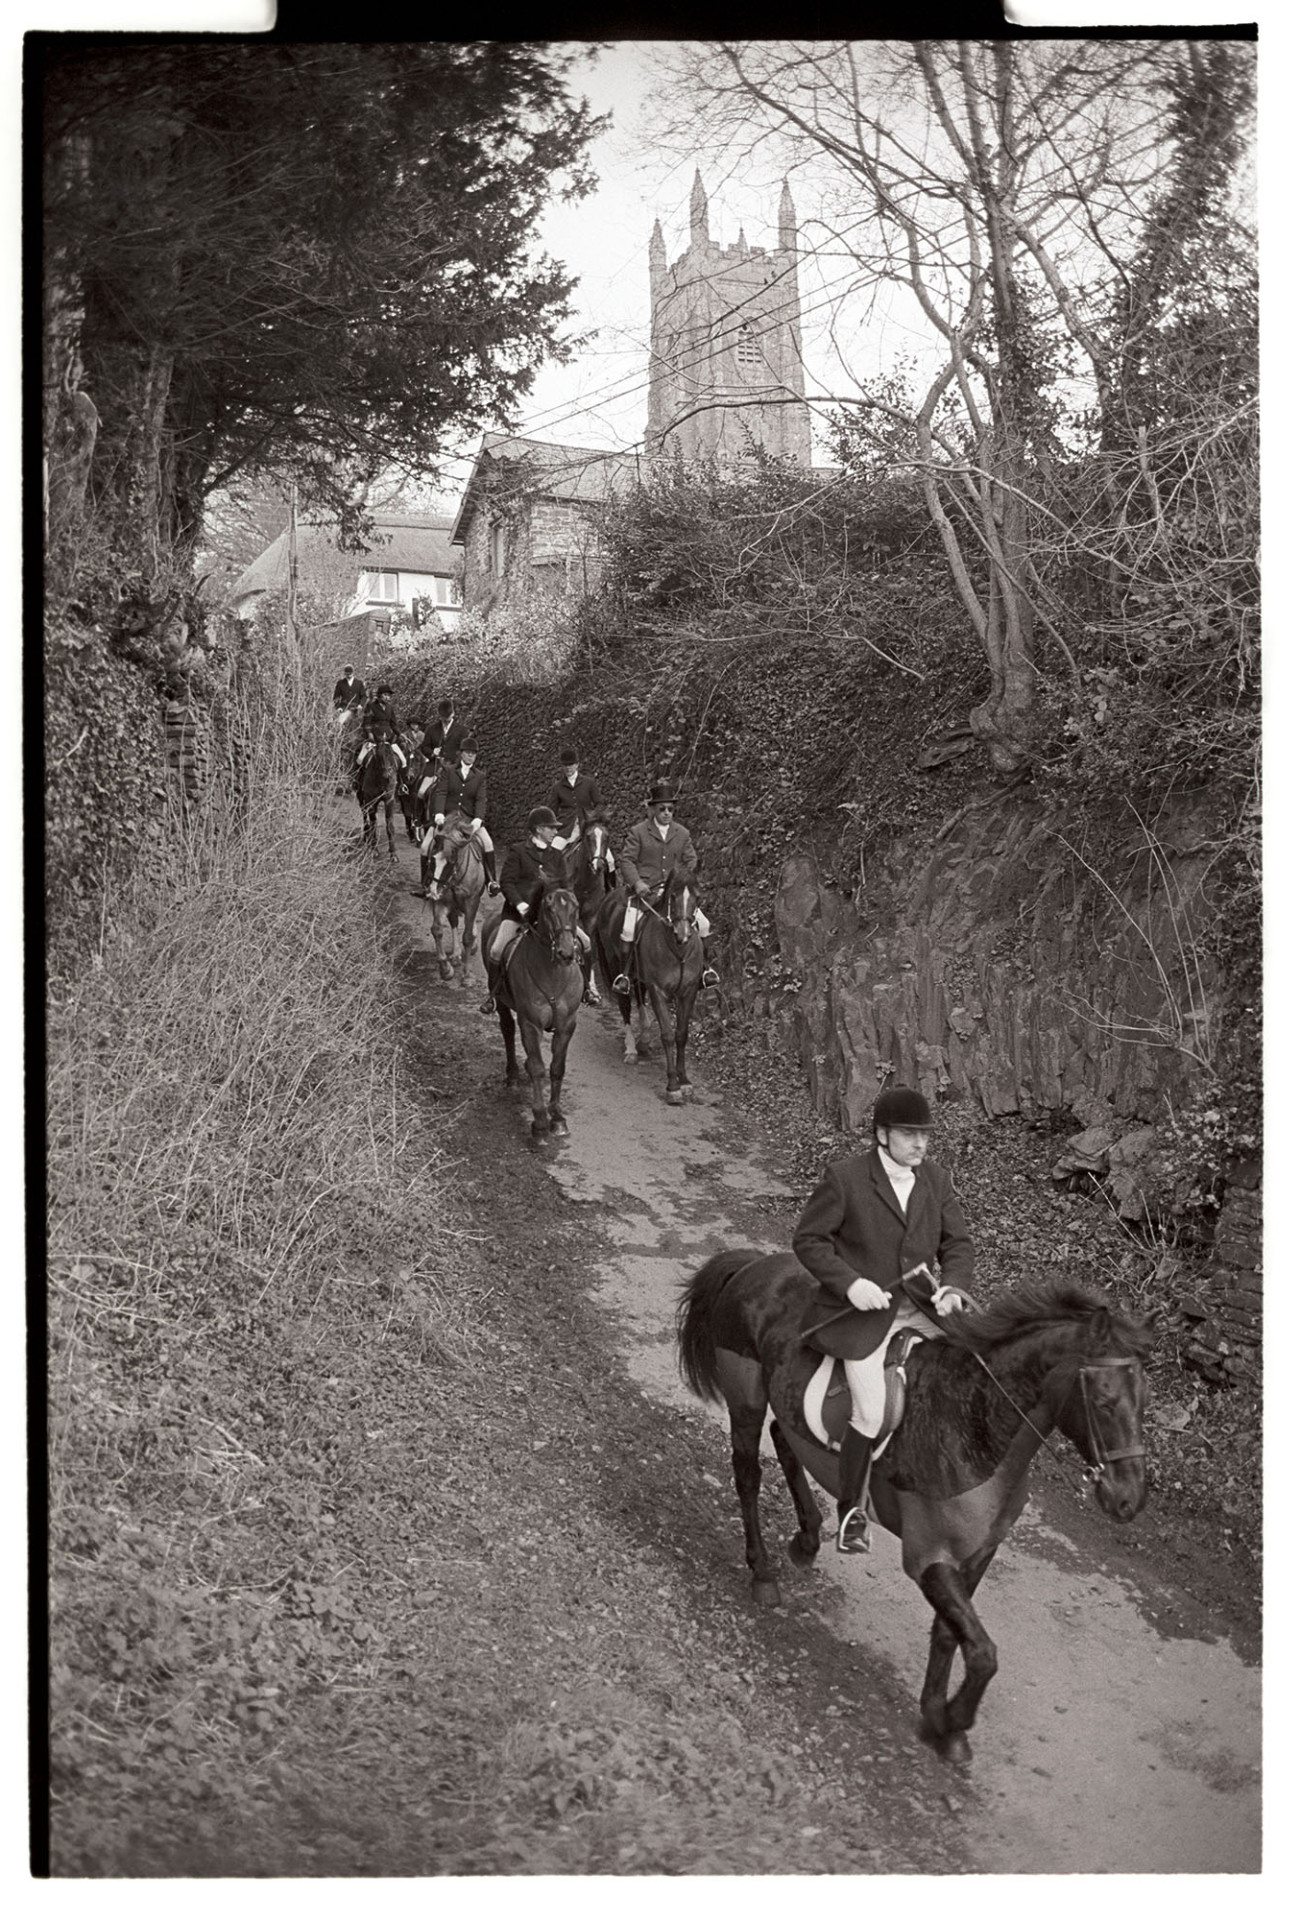 Hunt meet in front of Church, setting off down steep hill. 
[A hunt riding off down Rock Hill in Chulmleigh, to start hunting, after their Meet outside Chulmleigh Church, which is visible in the background.]